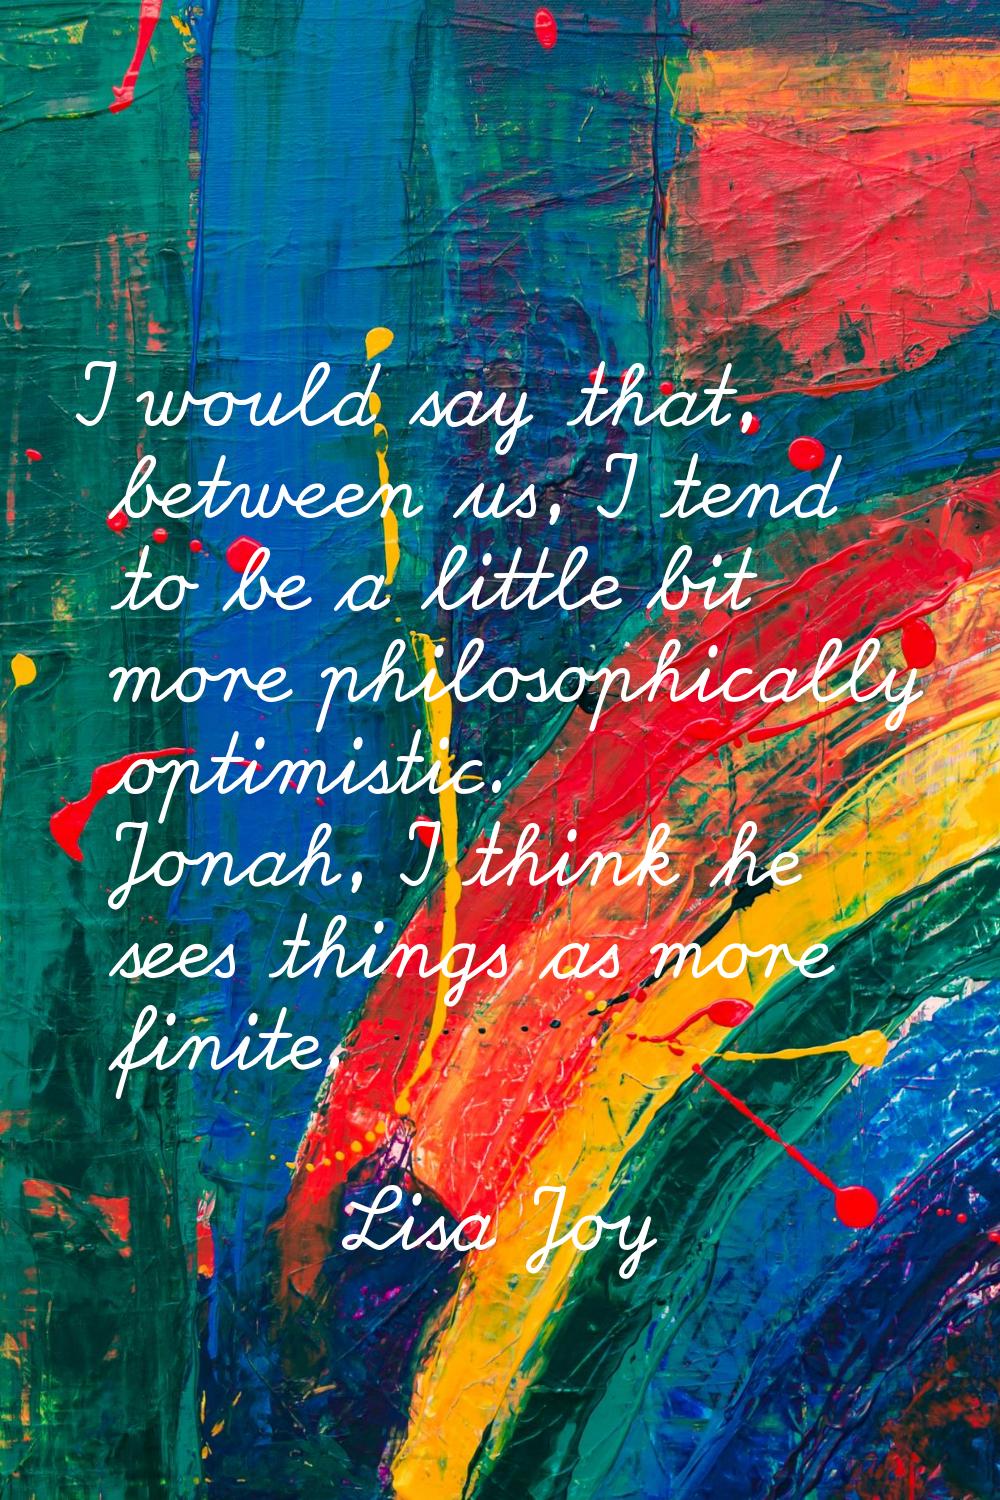 I would say that, between us, I tend to be a little bit more philosophically optimistic. Jonah, I t